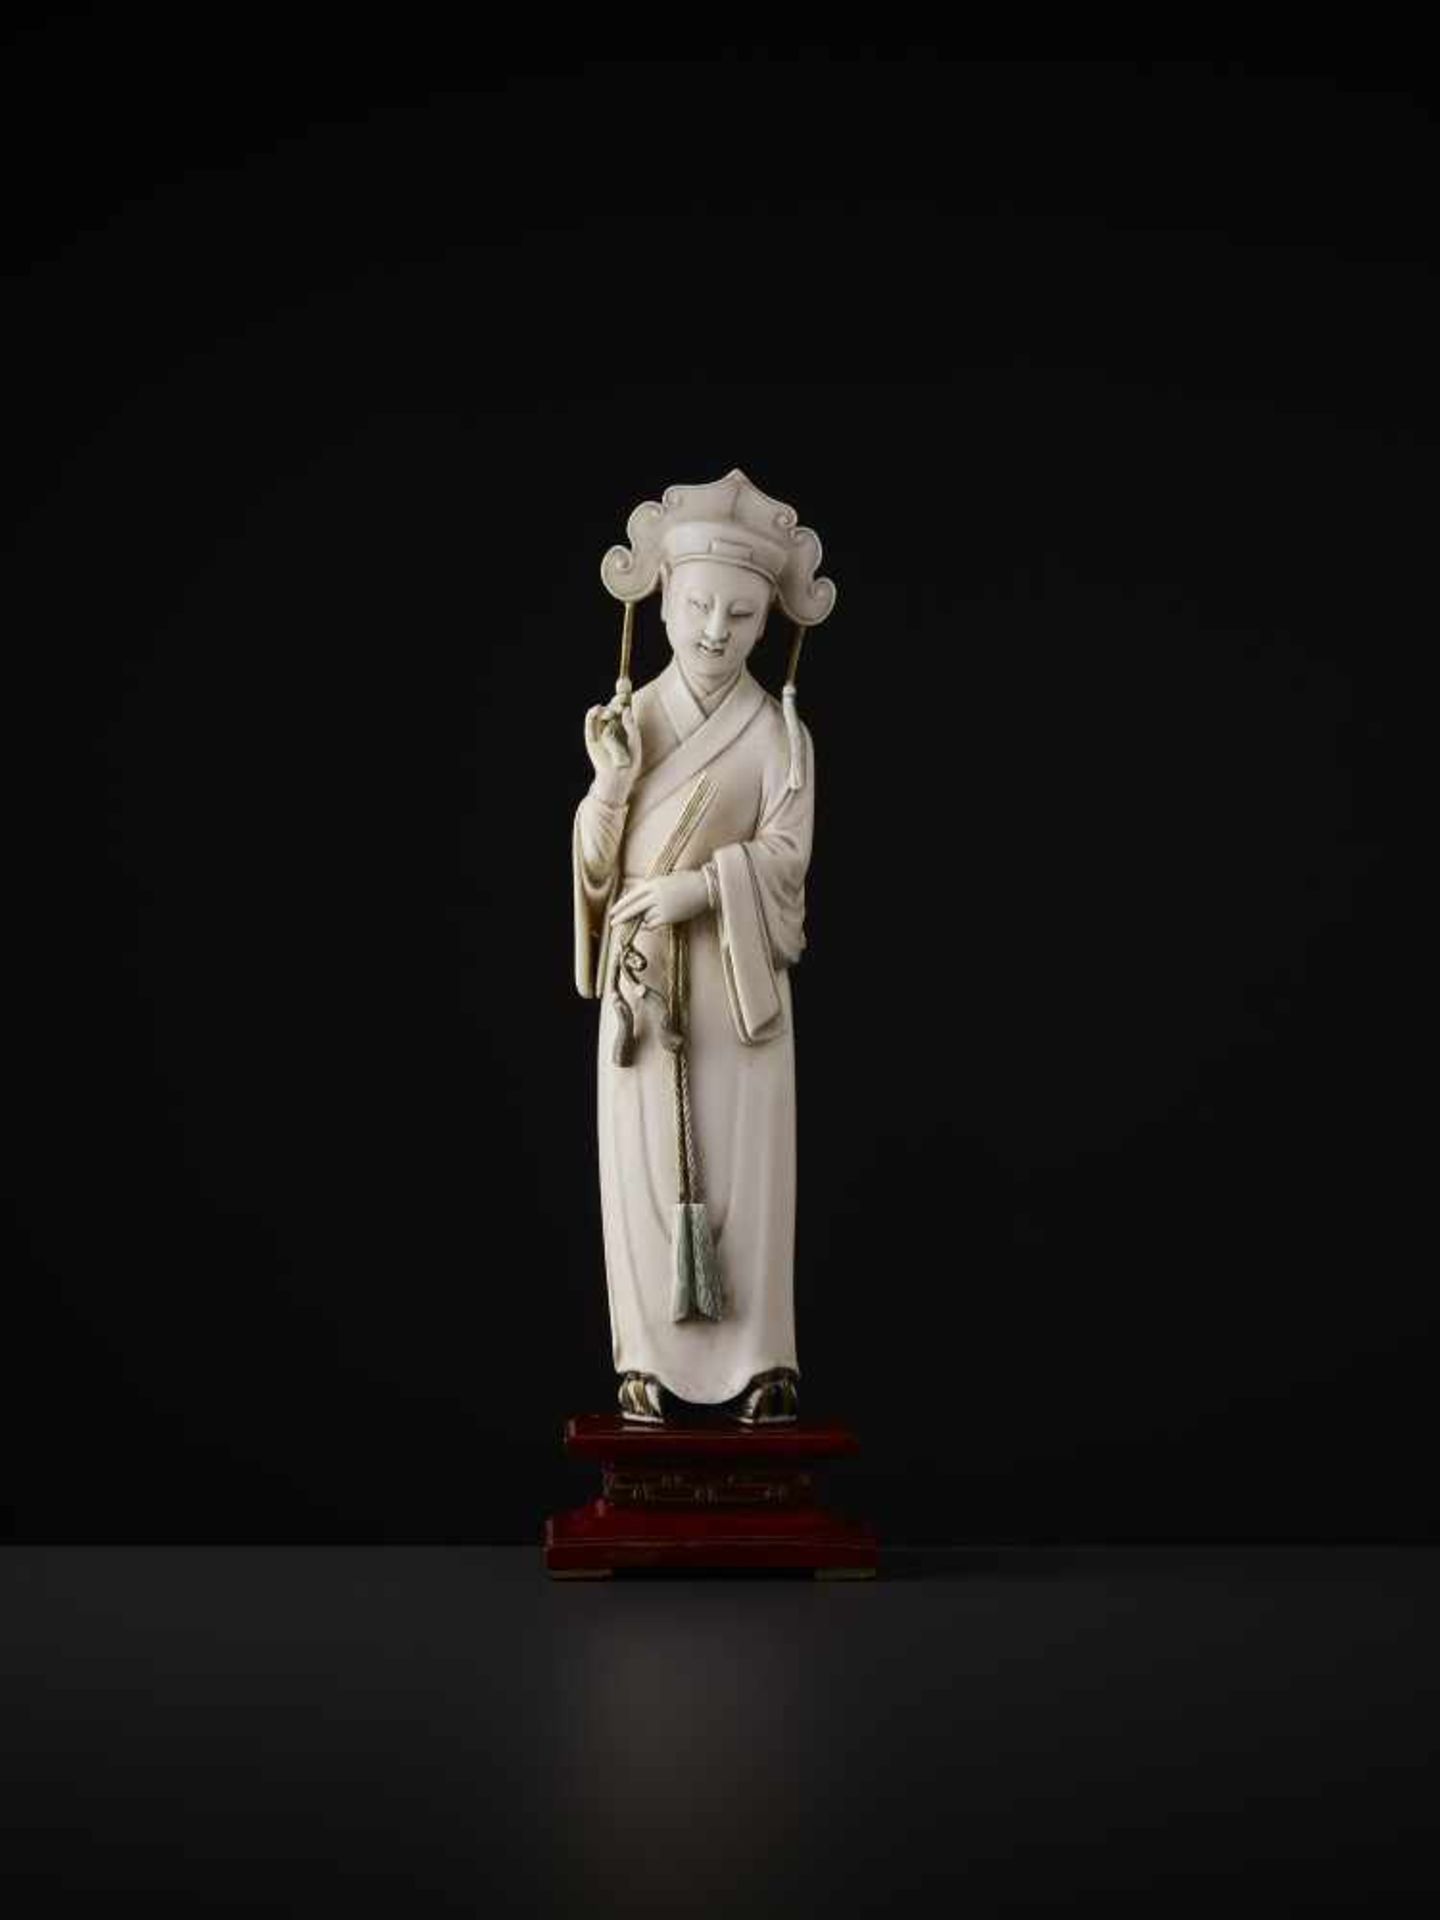 A MANCHU COURTIER IVORY FIGURE, QING China, 19th century. Openwork carving from a single piece of